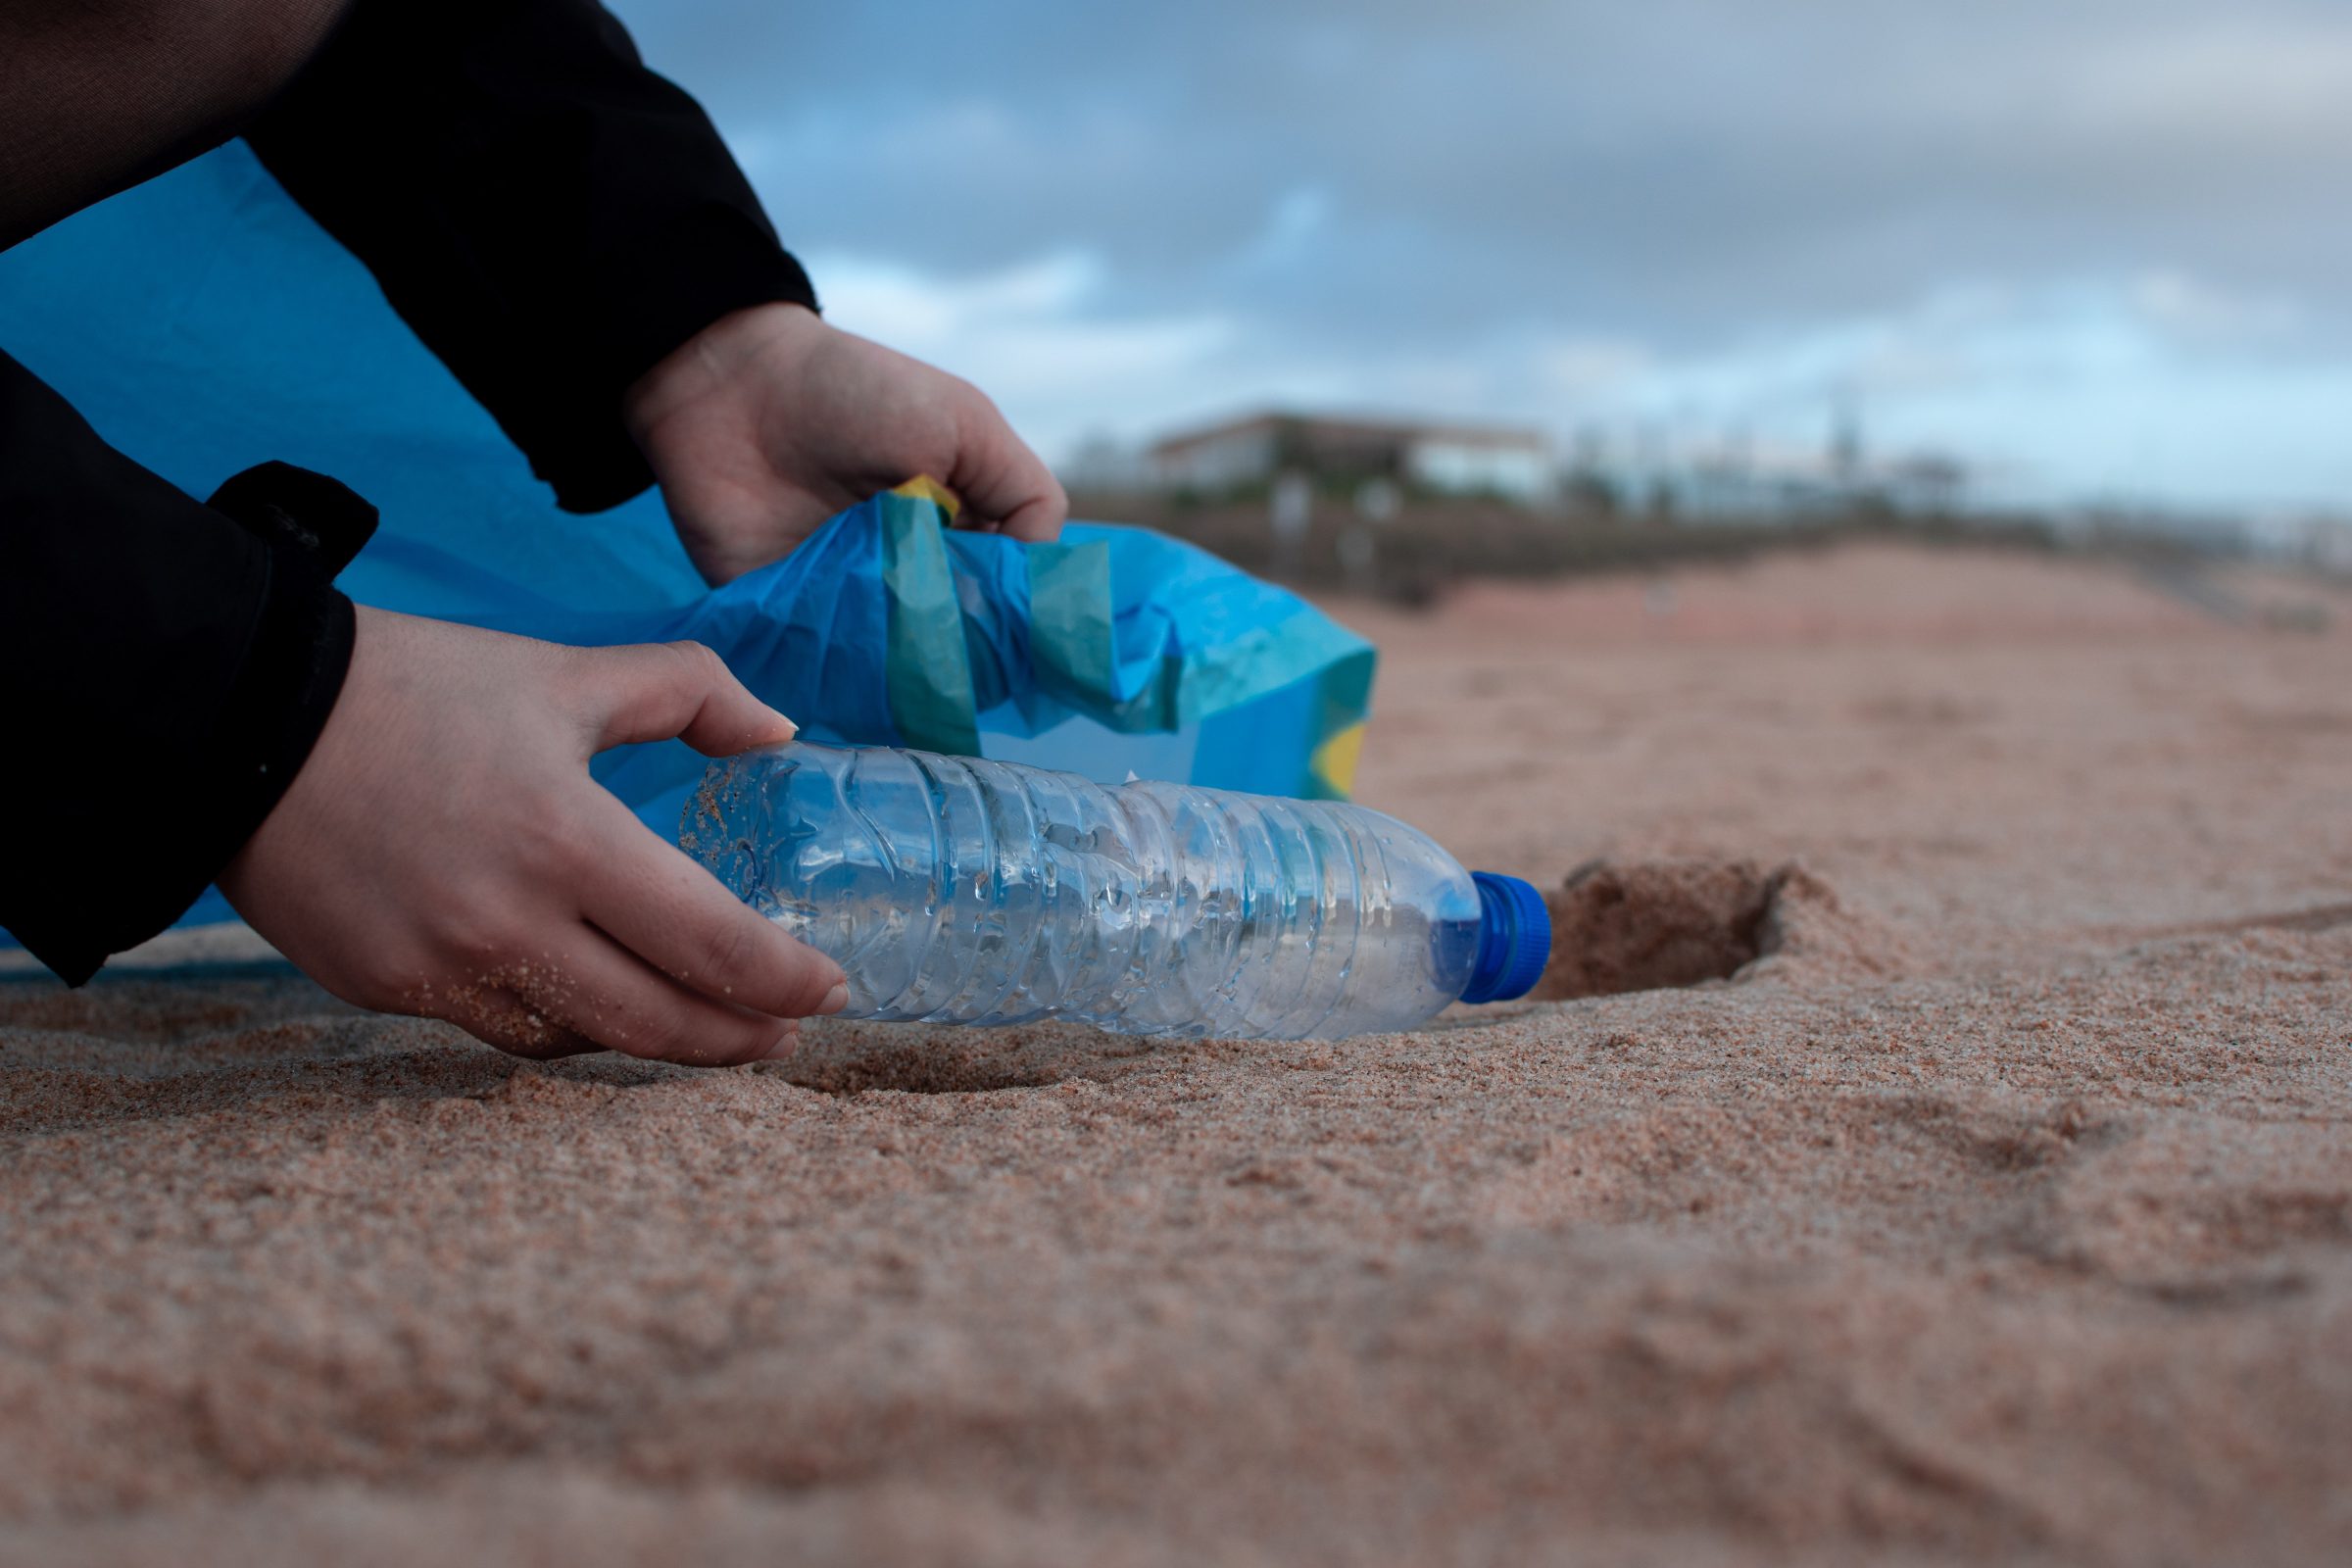 Picking up a bottle of rubbish on a beach